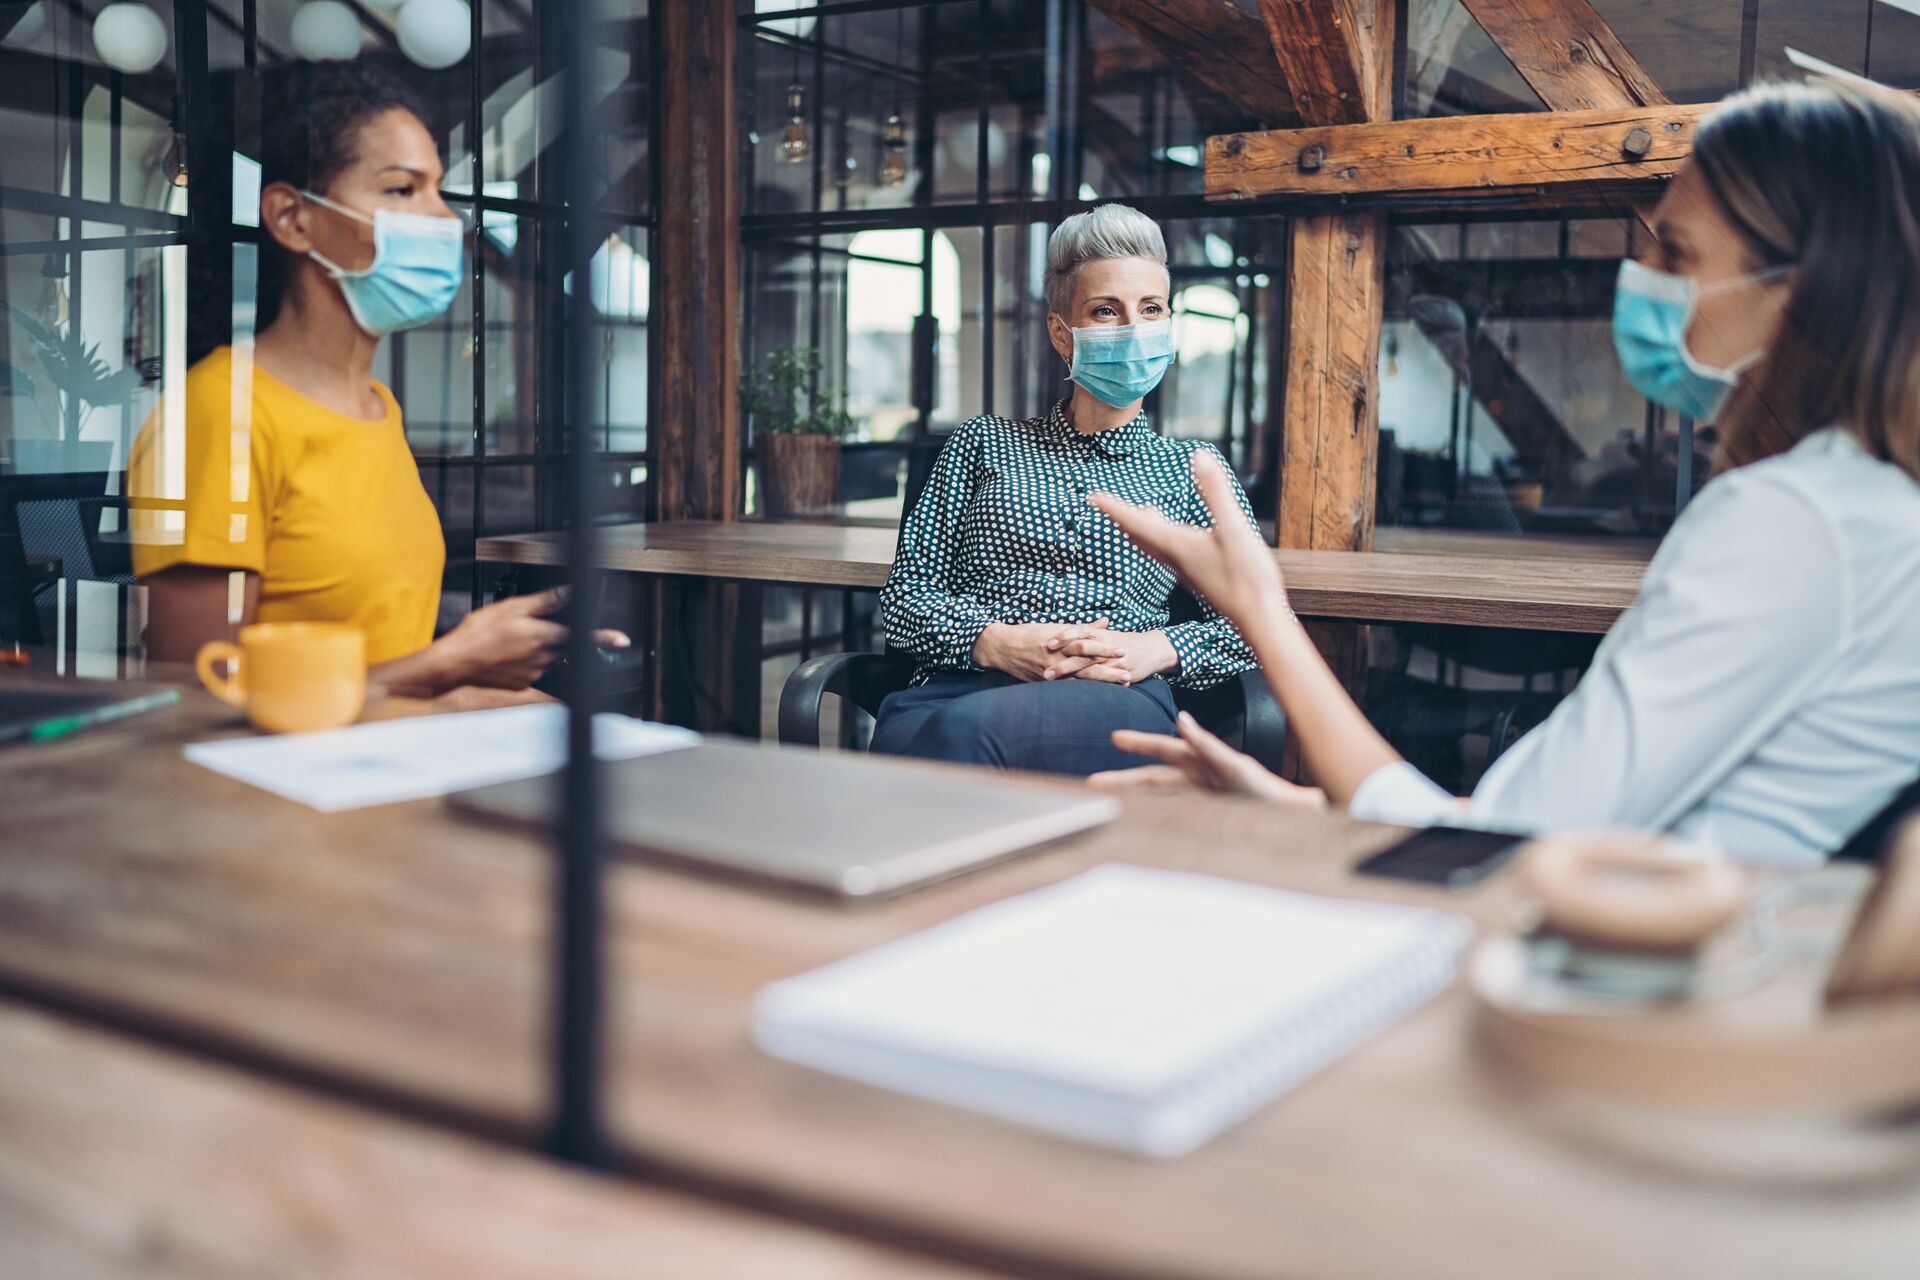 Three women sitting across table at work, discussing a project while wearing masks through a pandemic.